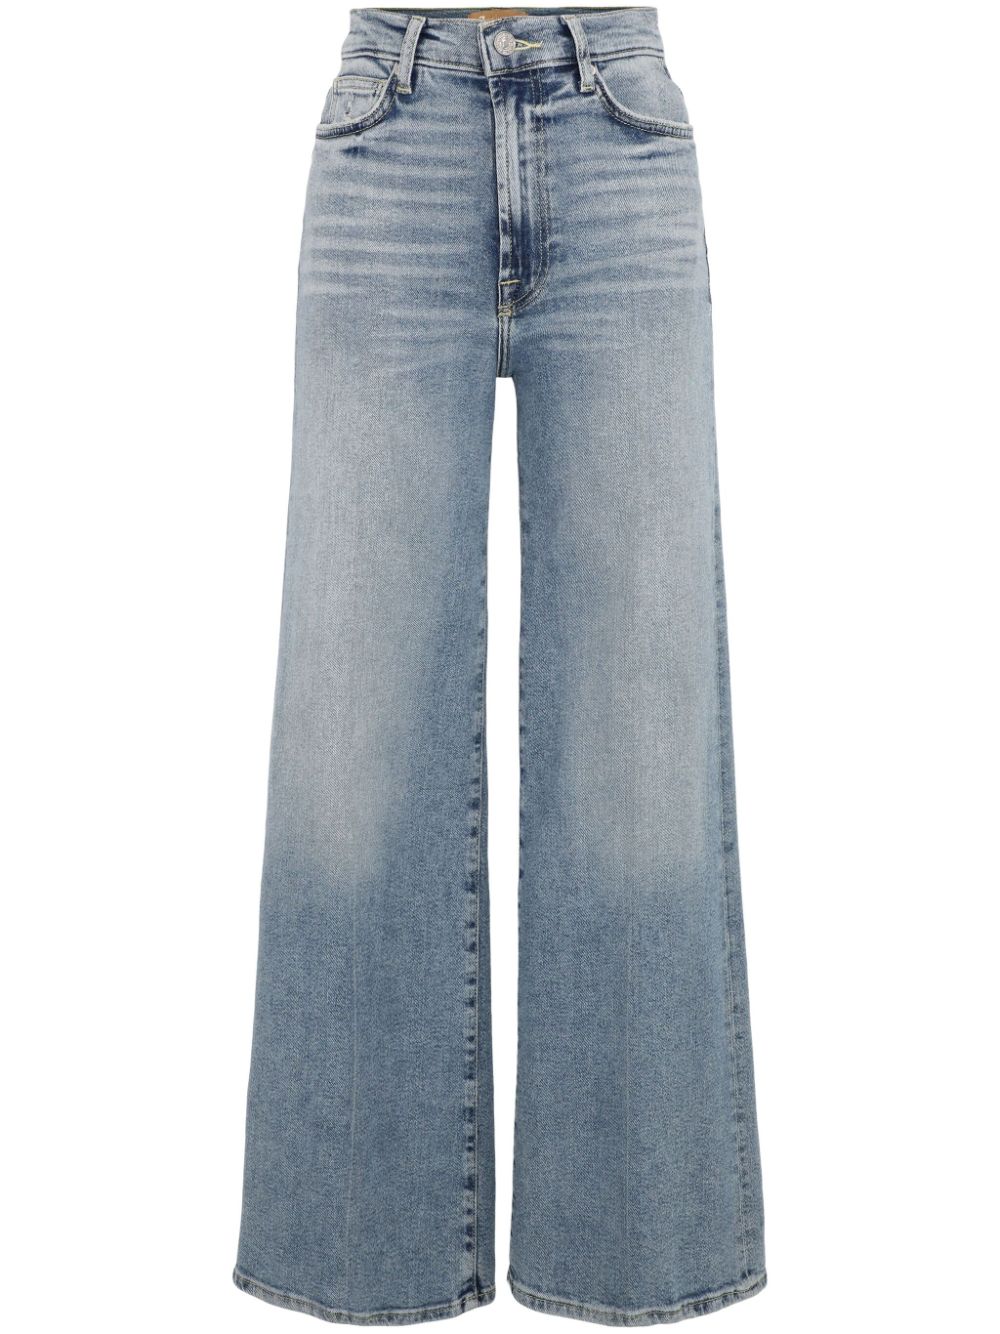 7 For All Mankind Jo ultra high-rise wide leg jeans - Blue von 7 For All Mankind